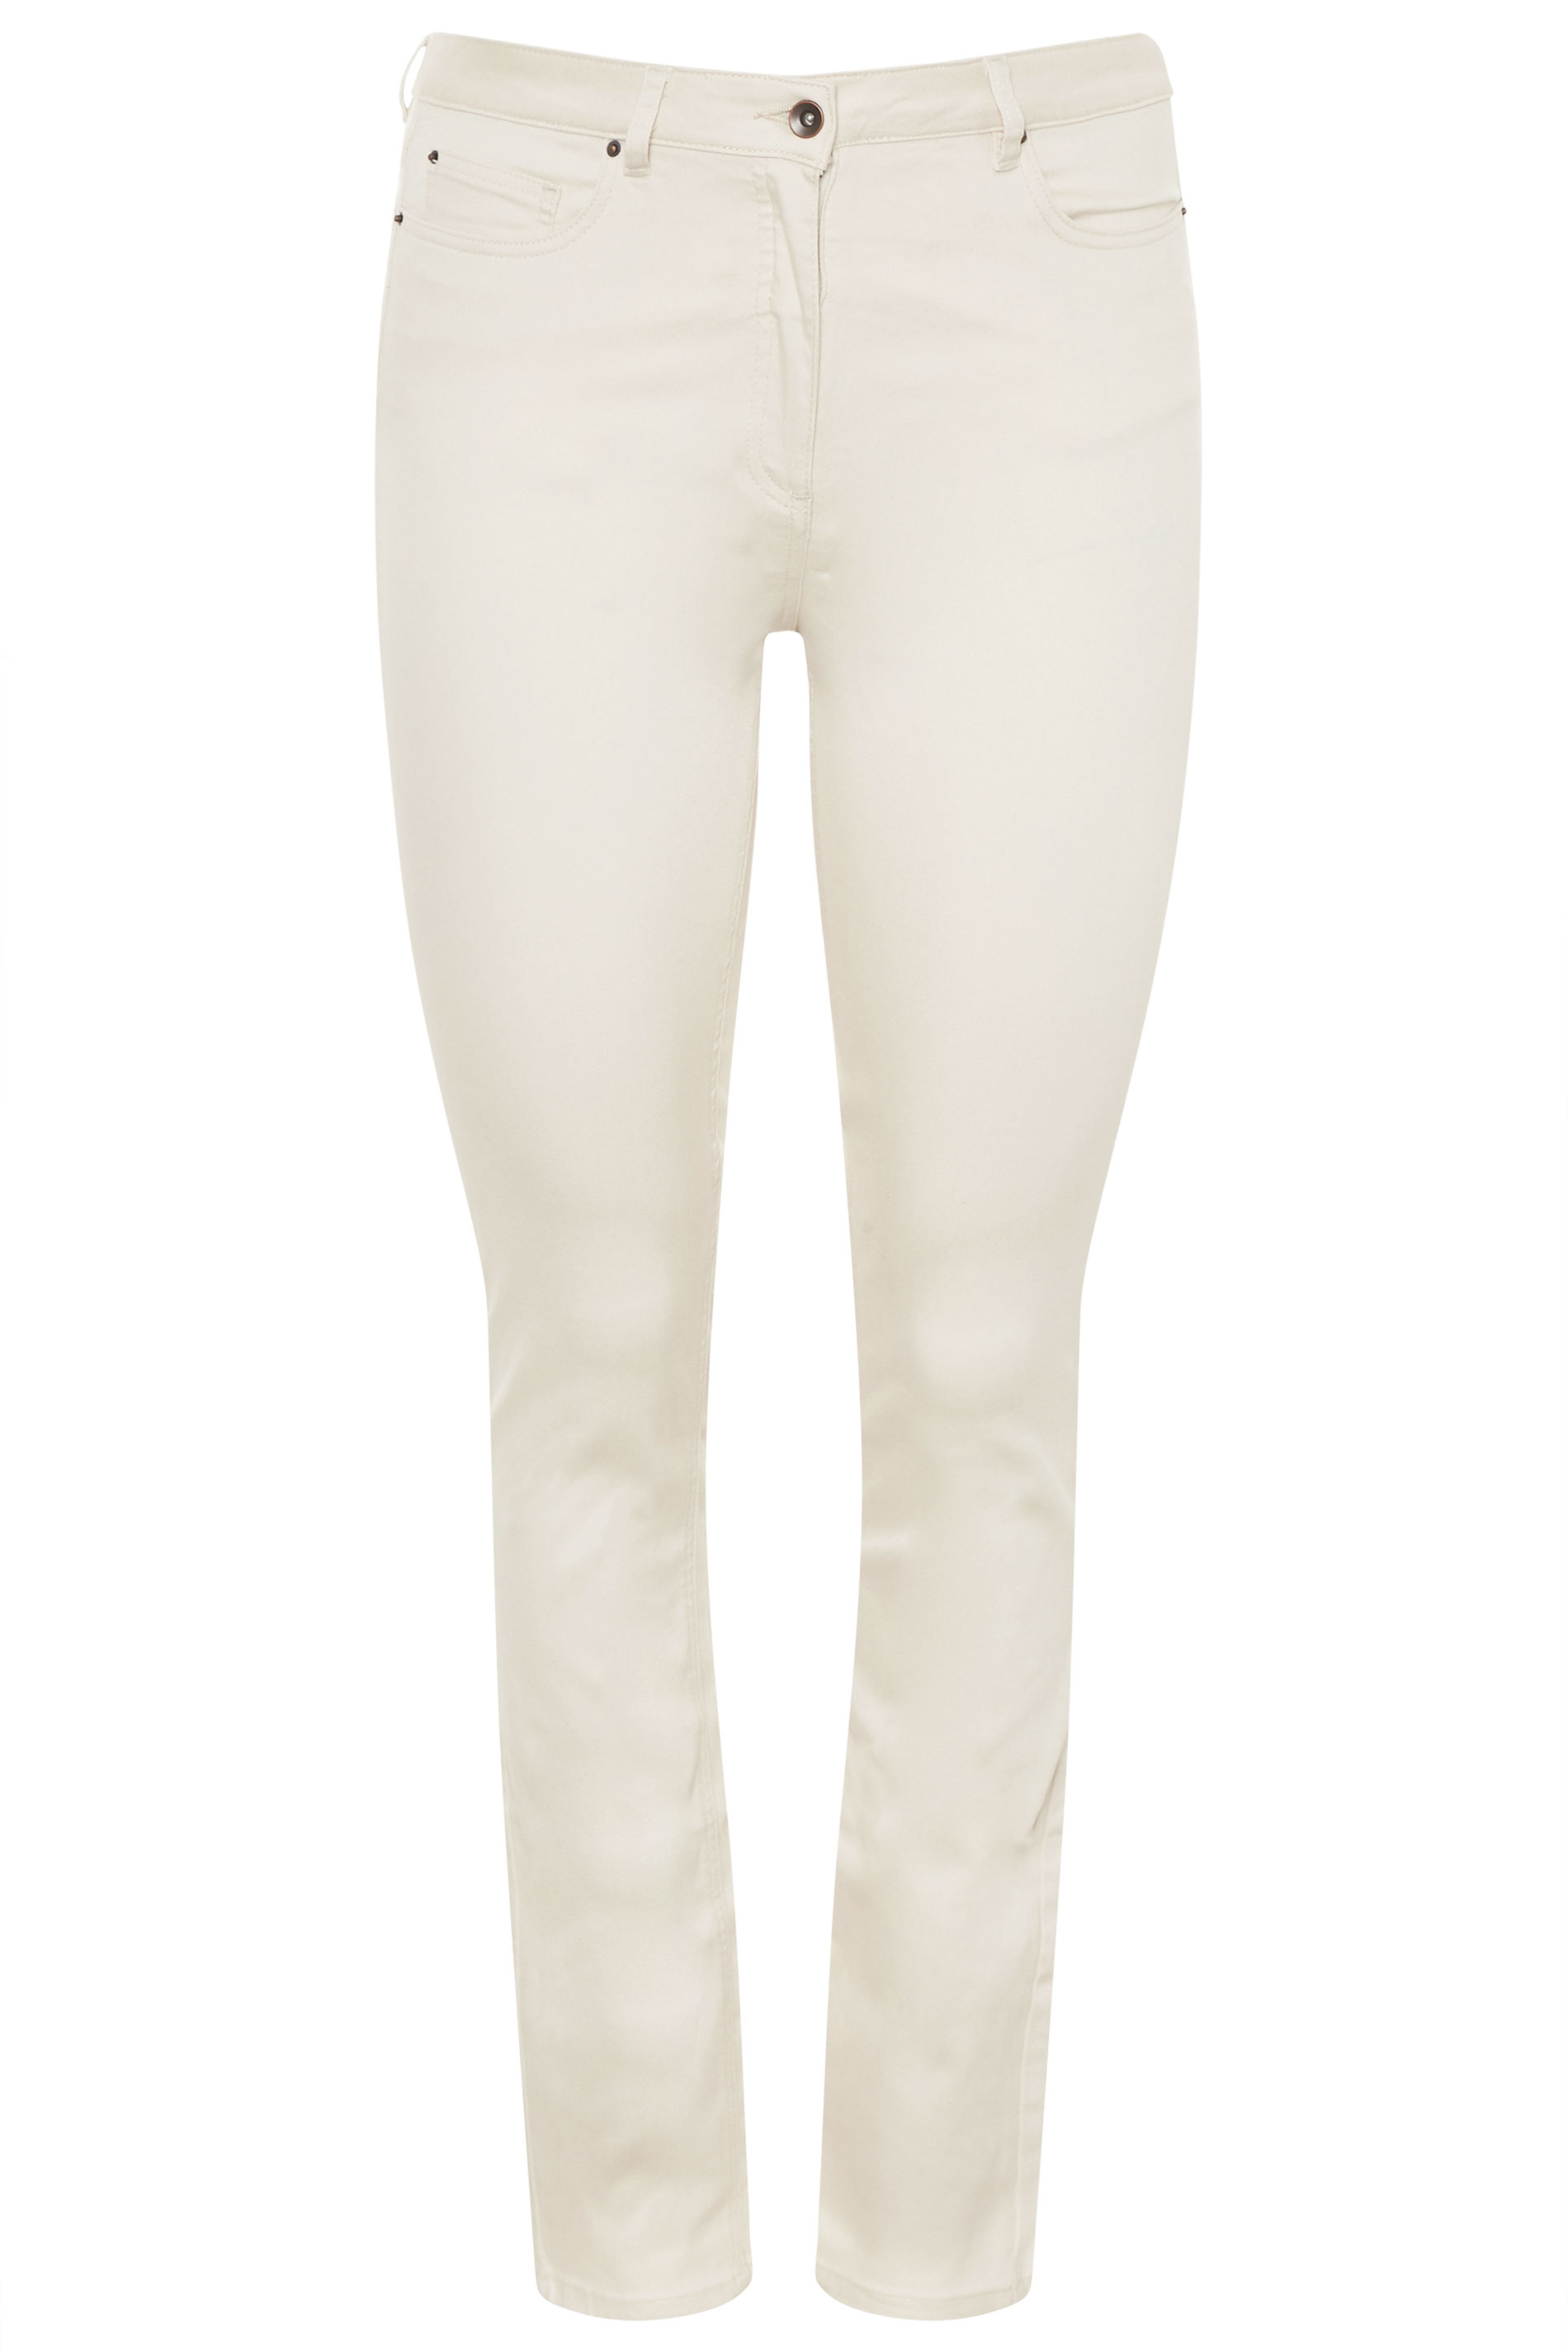 White Tencel Mix Soft Touch Jeans_F.jpg